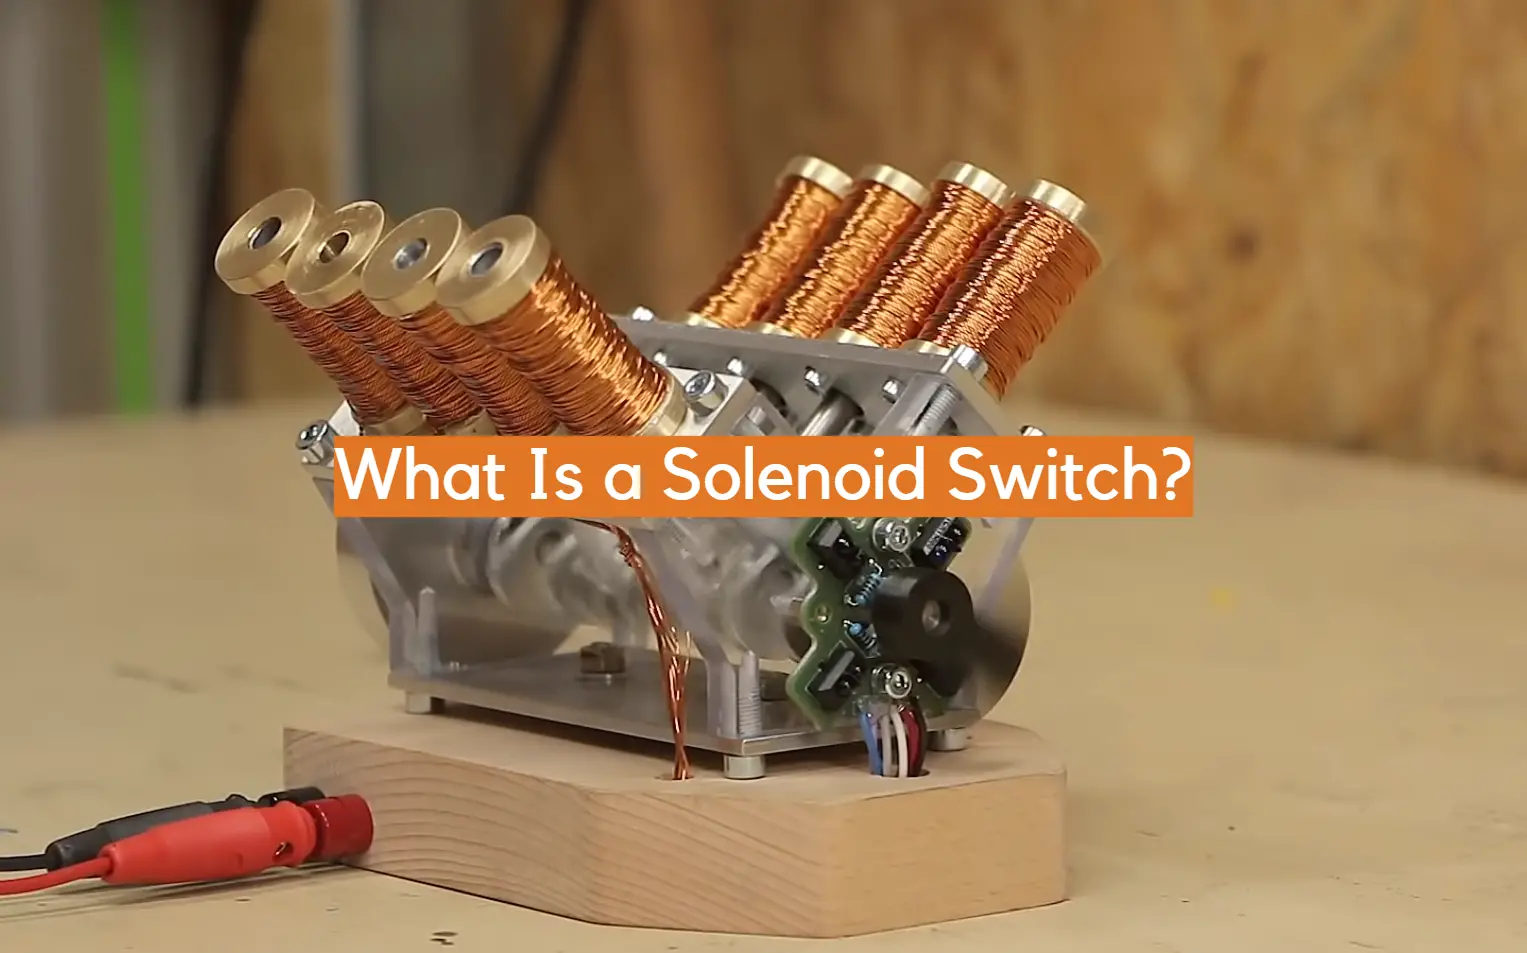 What Is a Solenoid Switch?